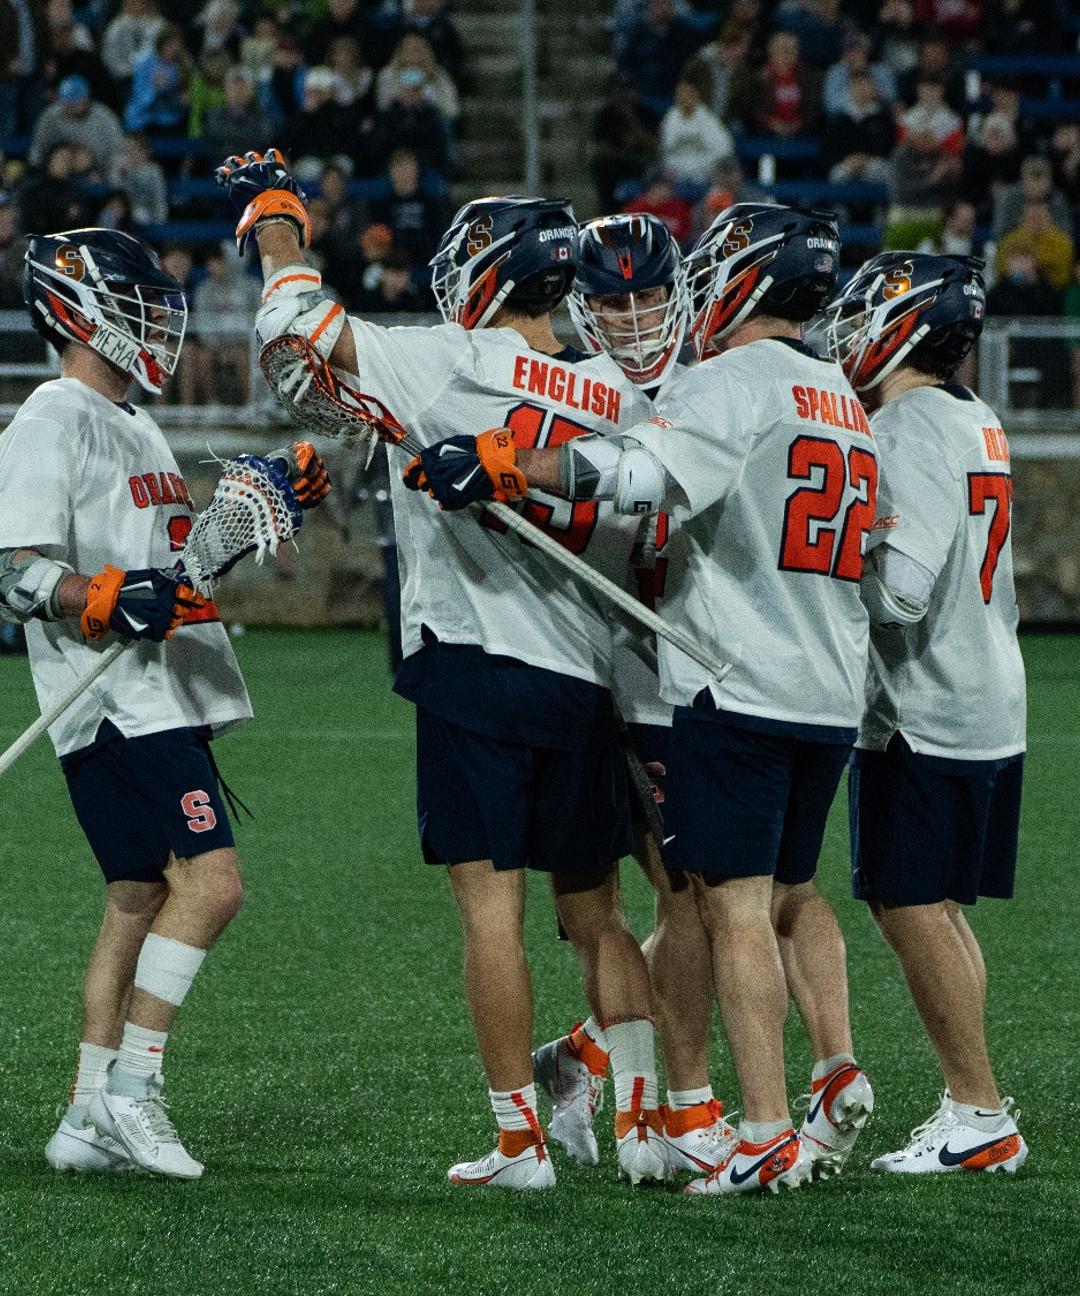 Image related to Men’s Lacrosse Ranked Third in Both Polls